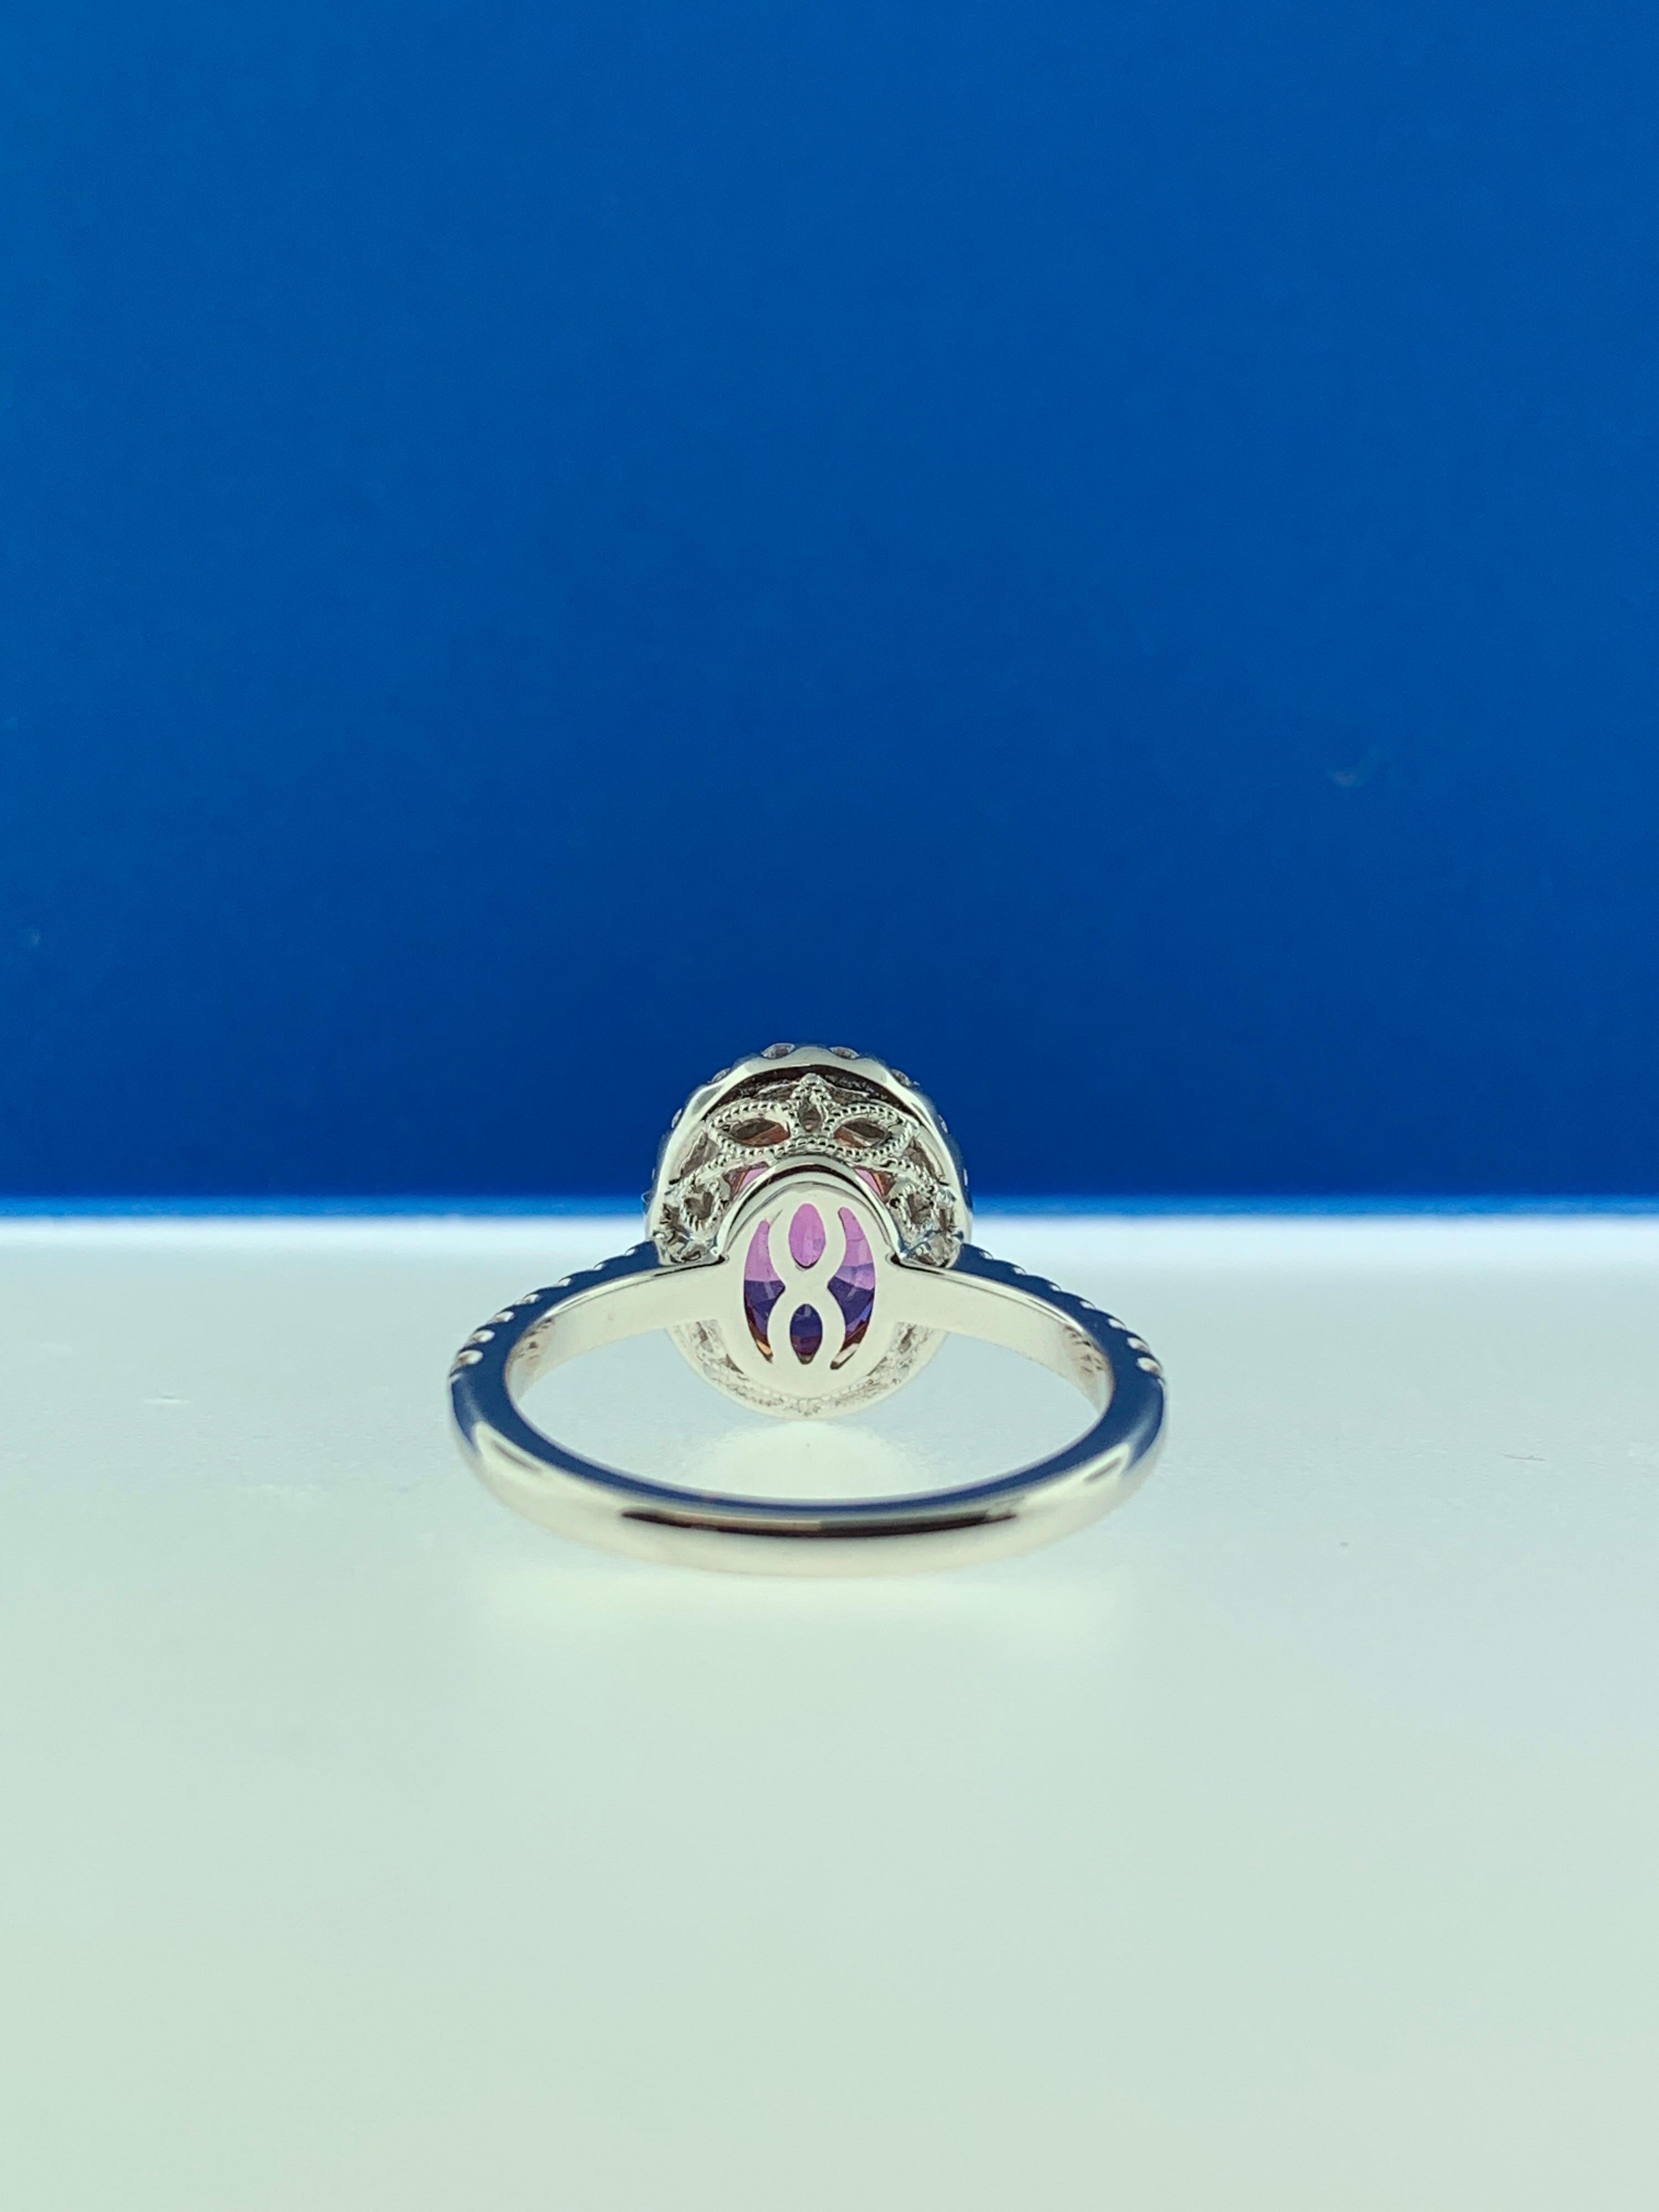 Women's 2.39 Carat Oval Pink Sapphire and Diamond Cocktail Ring